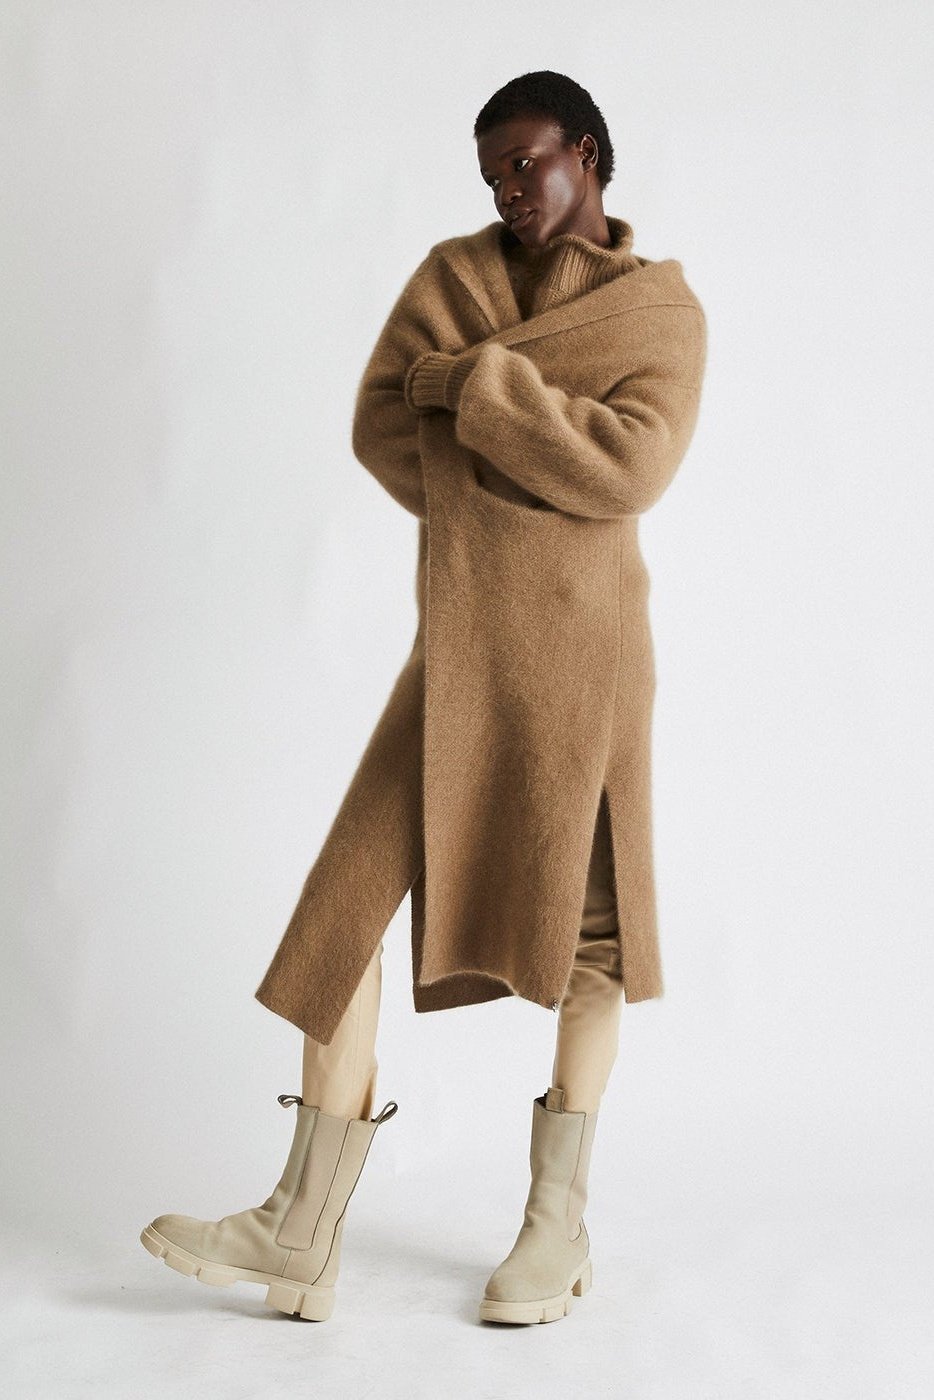 + Beryll Vivian Cashmere Coat with Hood | Driftwood - + Beryll Cashmere Coat with Hood | Driftwood - +Beryll Worn By Good People